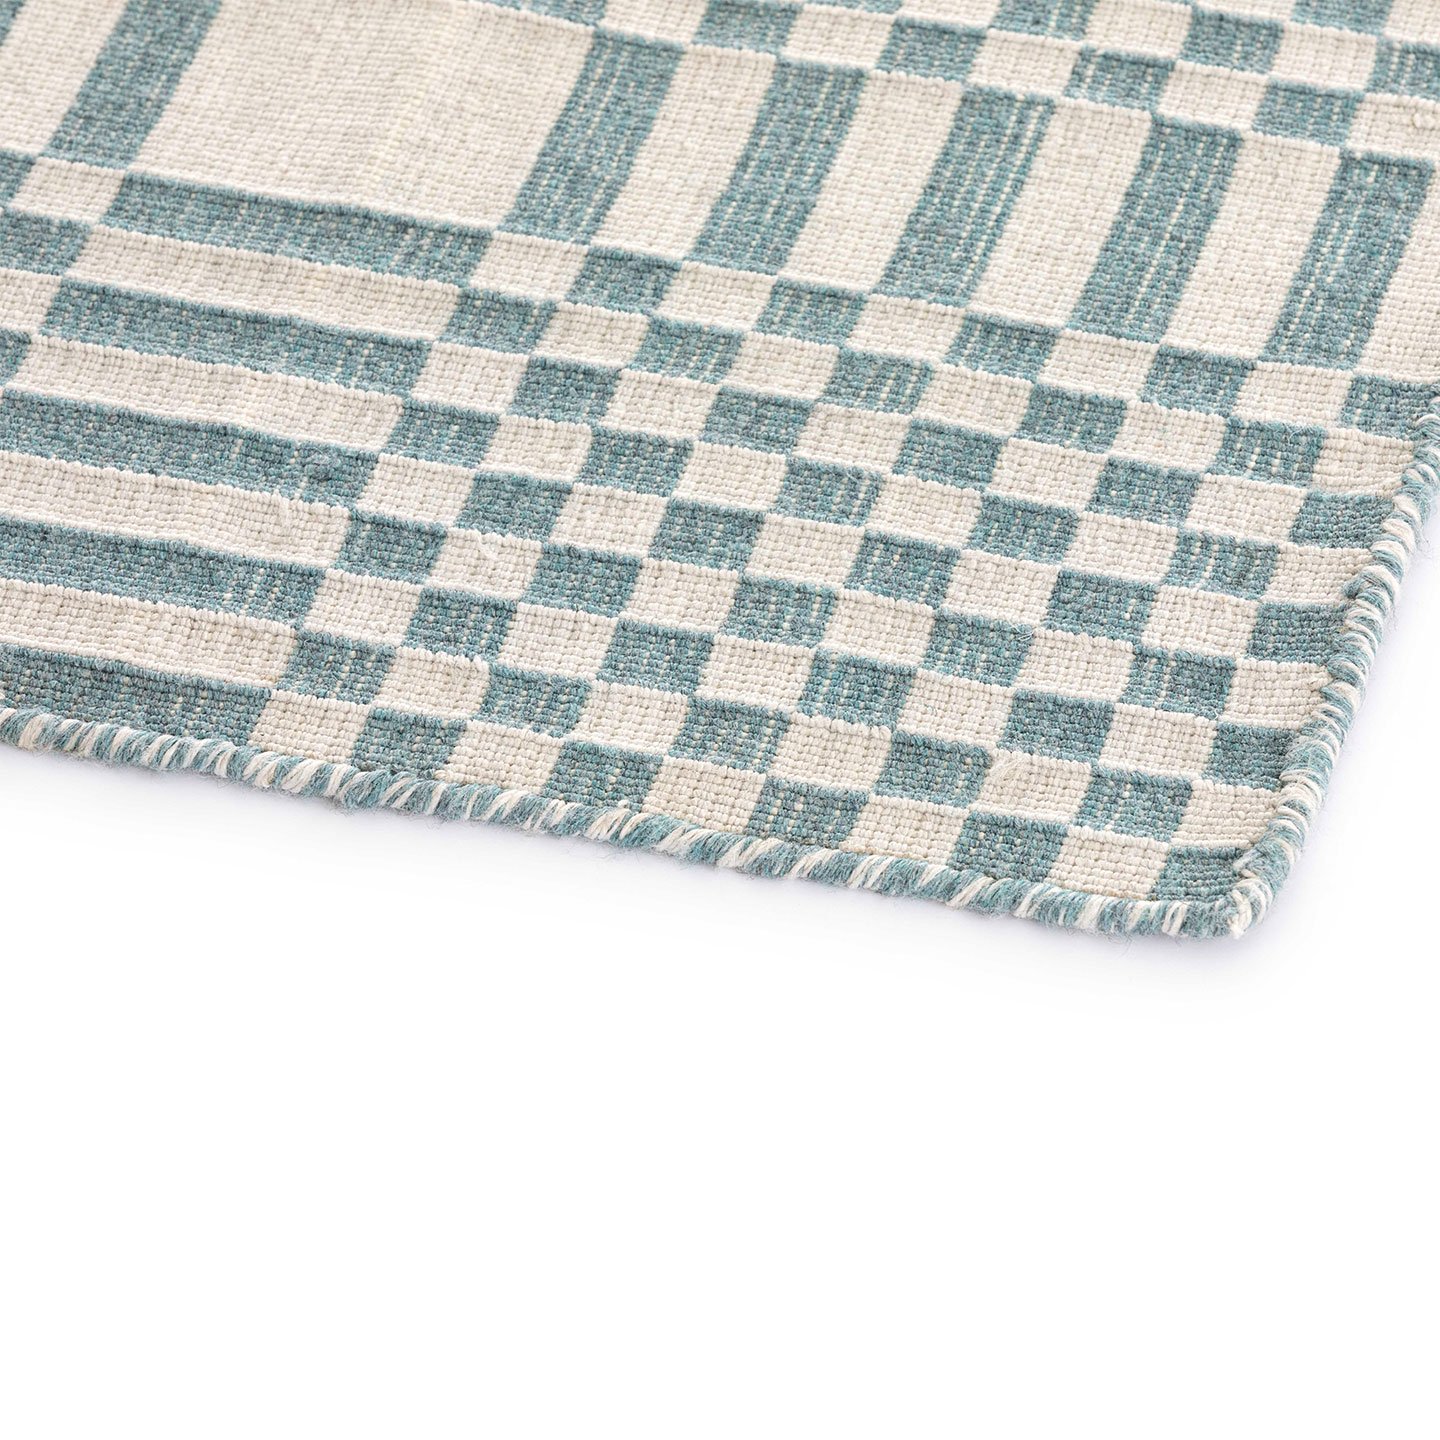 Haworth Patch Rug in blue and white color with square pattern